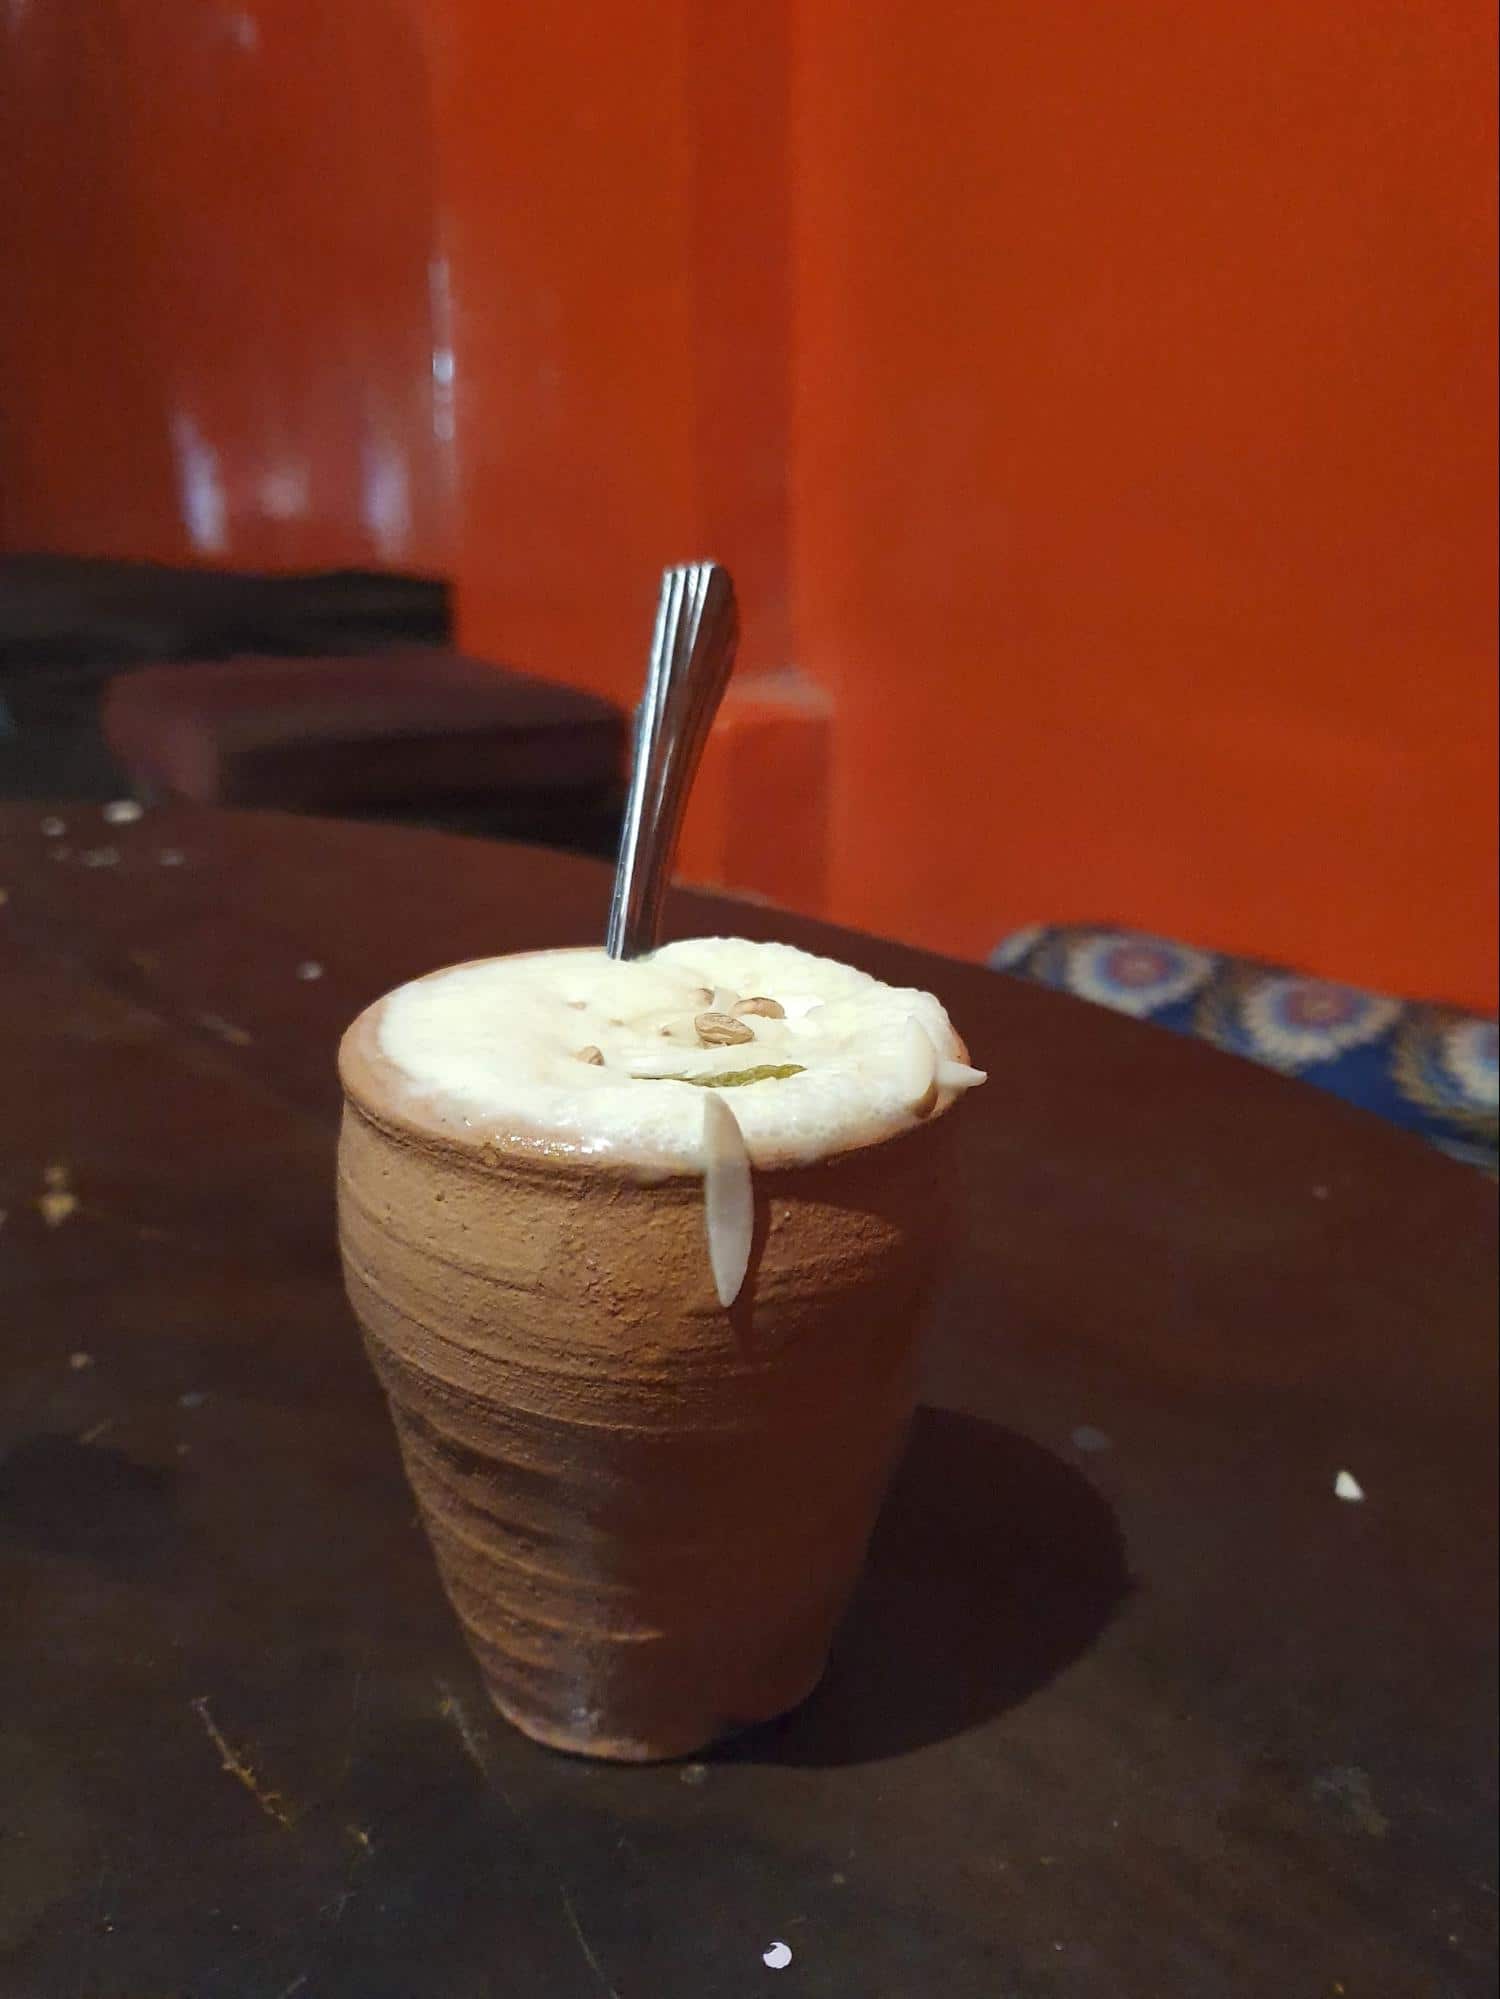 Makhani lassi with bhang in Jaisalmer